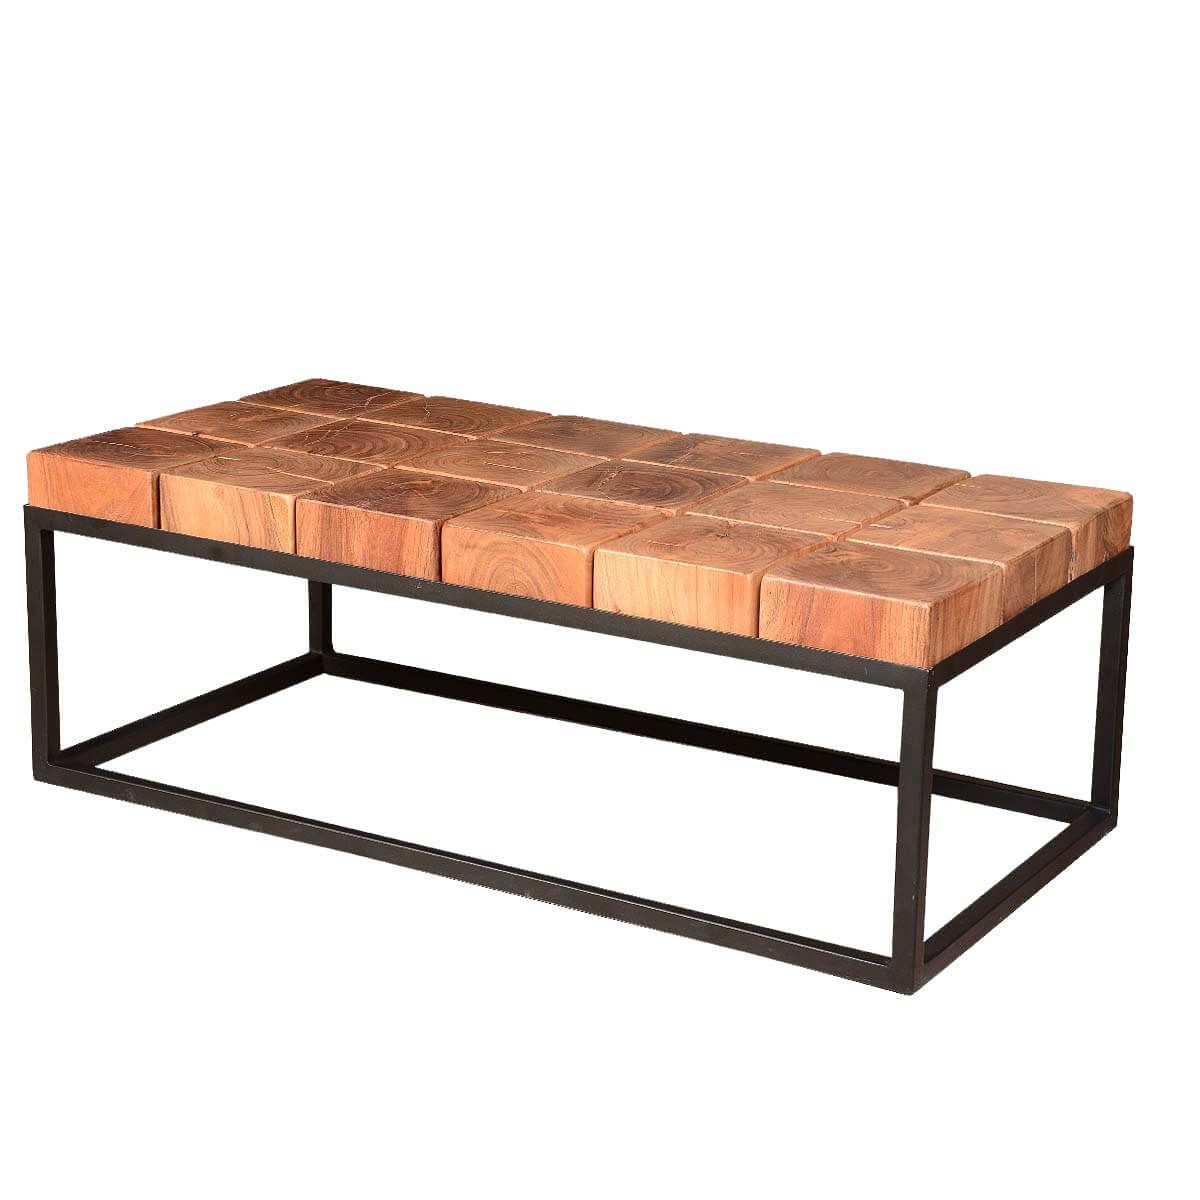 Solid Acacia Wood Block Contemporary Iron Base Rustic Coffee Table With Solid Acacia Wood Coffee Tables (View 12 of 20)